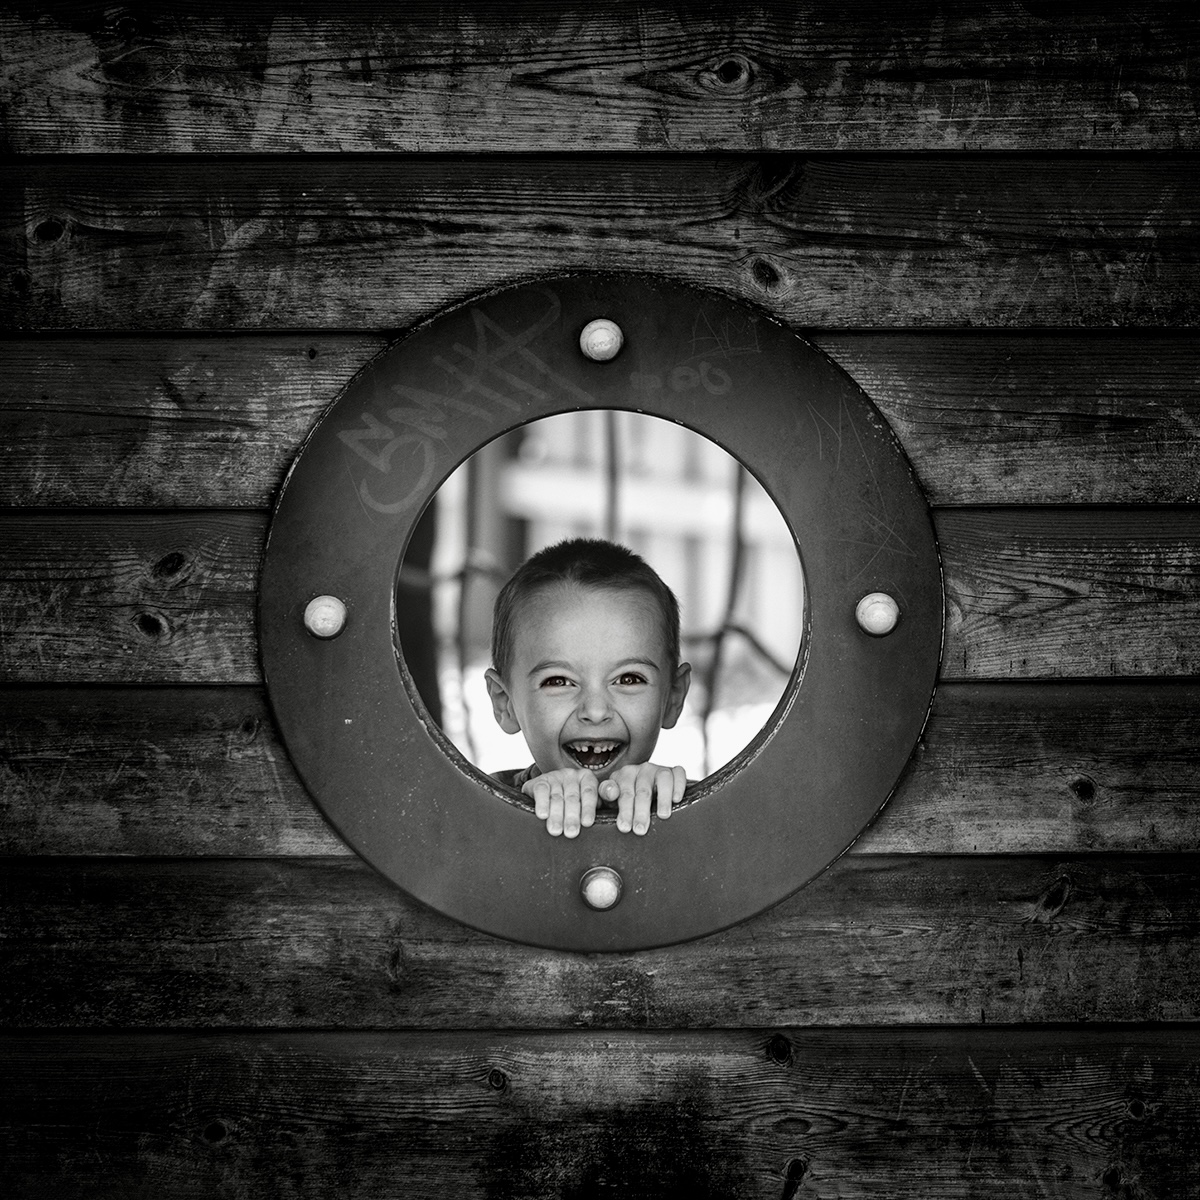 Cheeky | Author My Family Day Photography - My.Family.Day | PHOTO FORUM